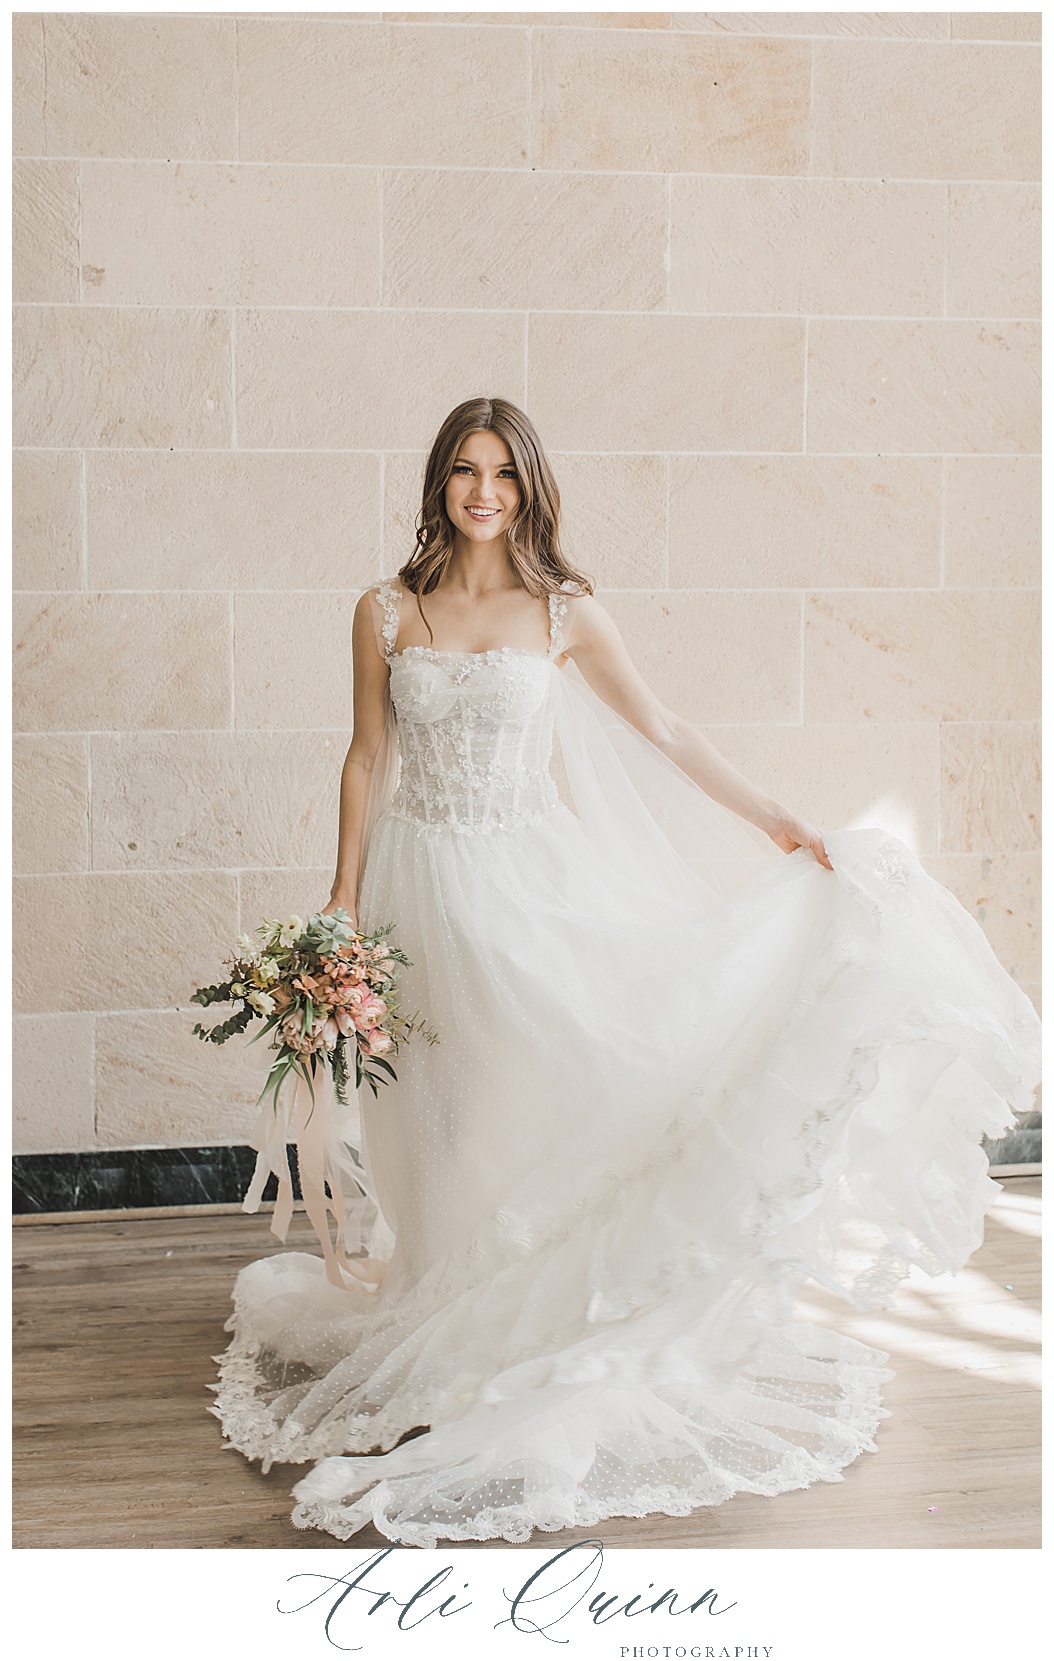 ALB Couture Bridal Gowns